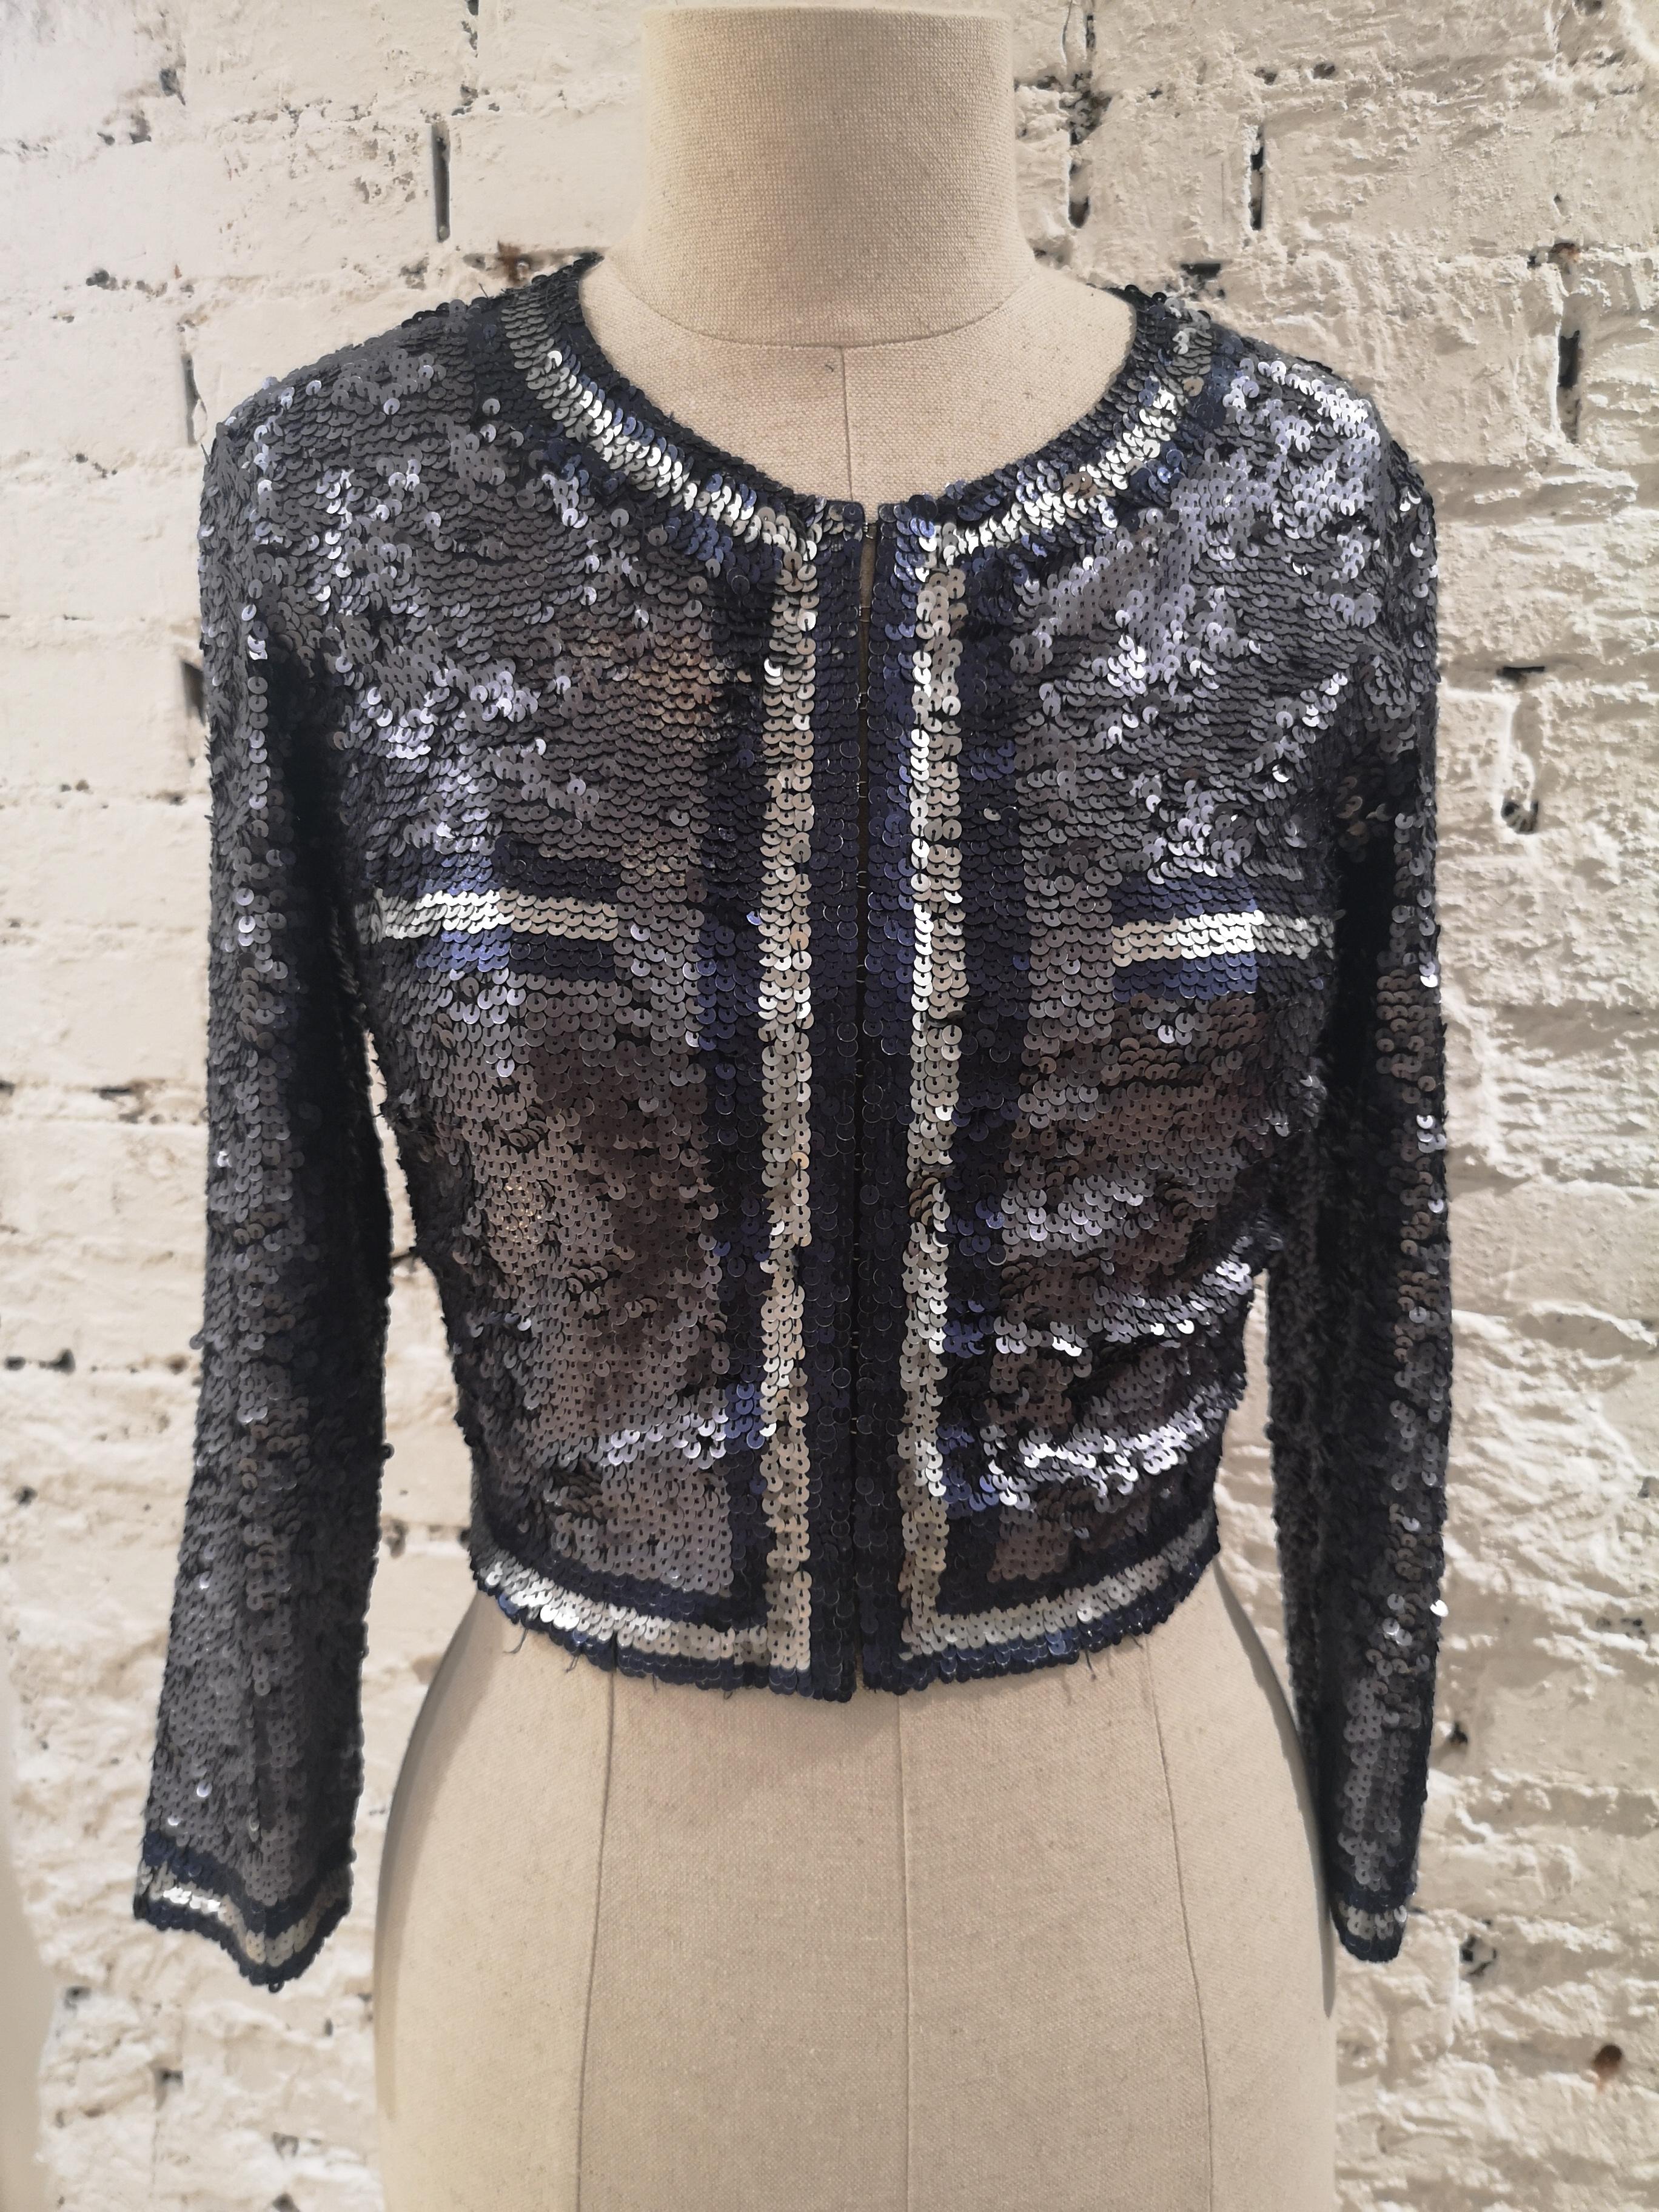 Parosh blue silver sequins jackettotally made in italy in nylon embellished with sequins all over
size S
total lenght 40 cm
shoulder to hem 42 cm